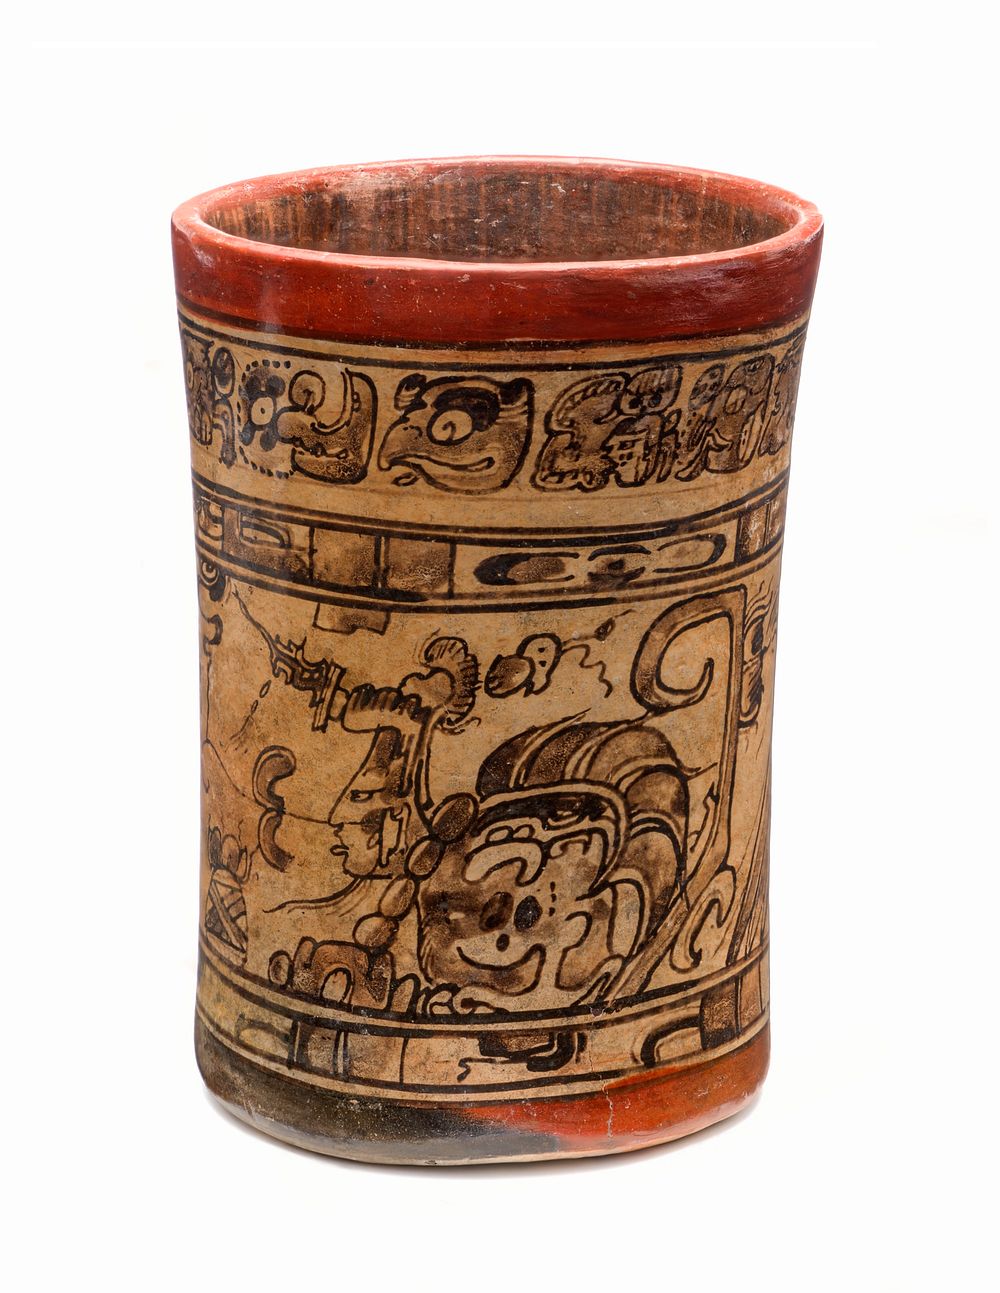 Codex-Style Cylinder Vessel with Avian Maize God